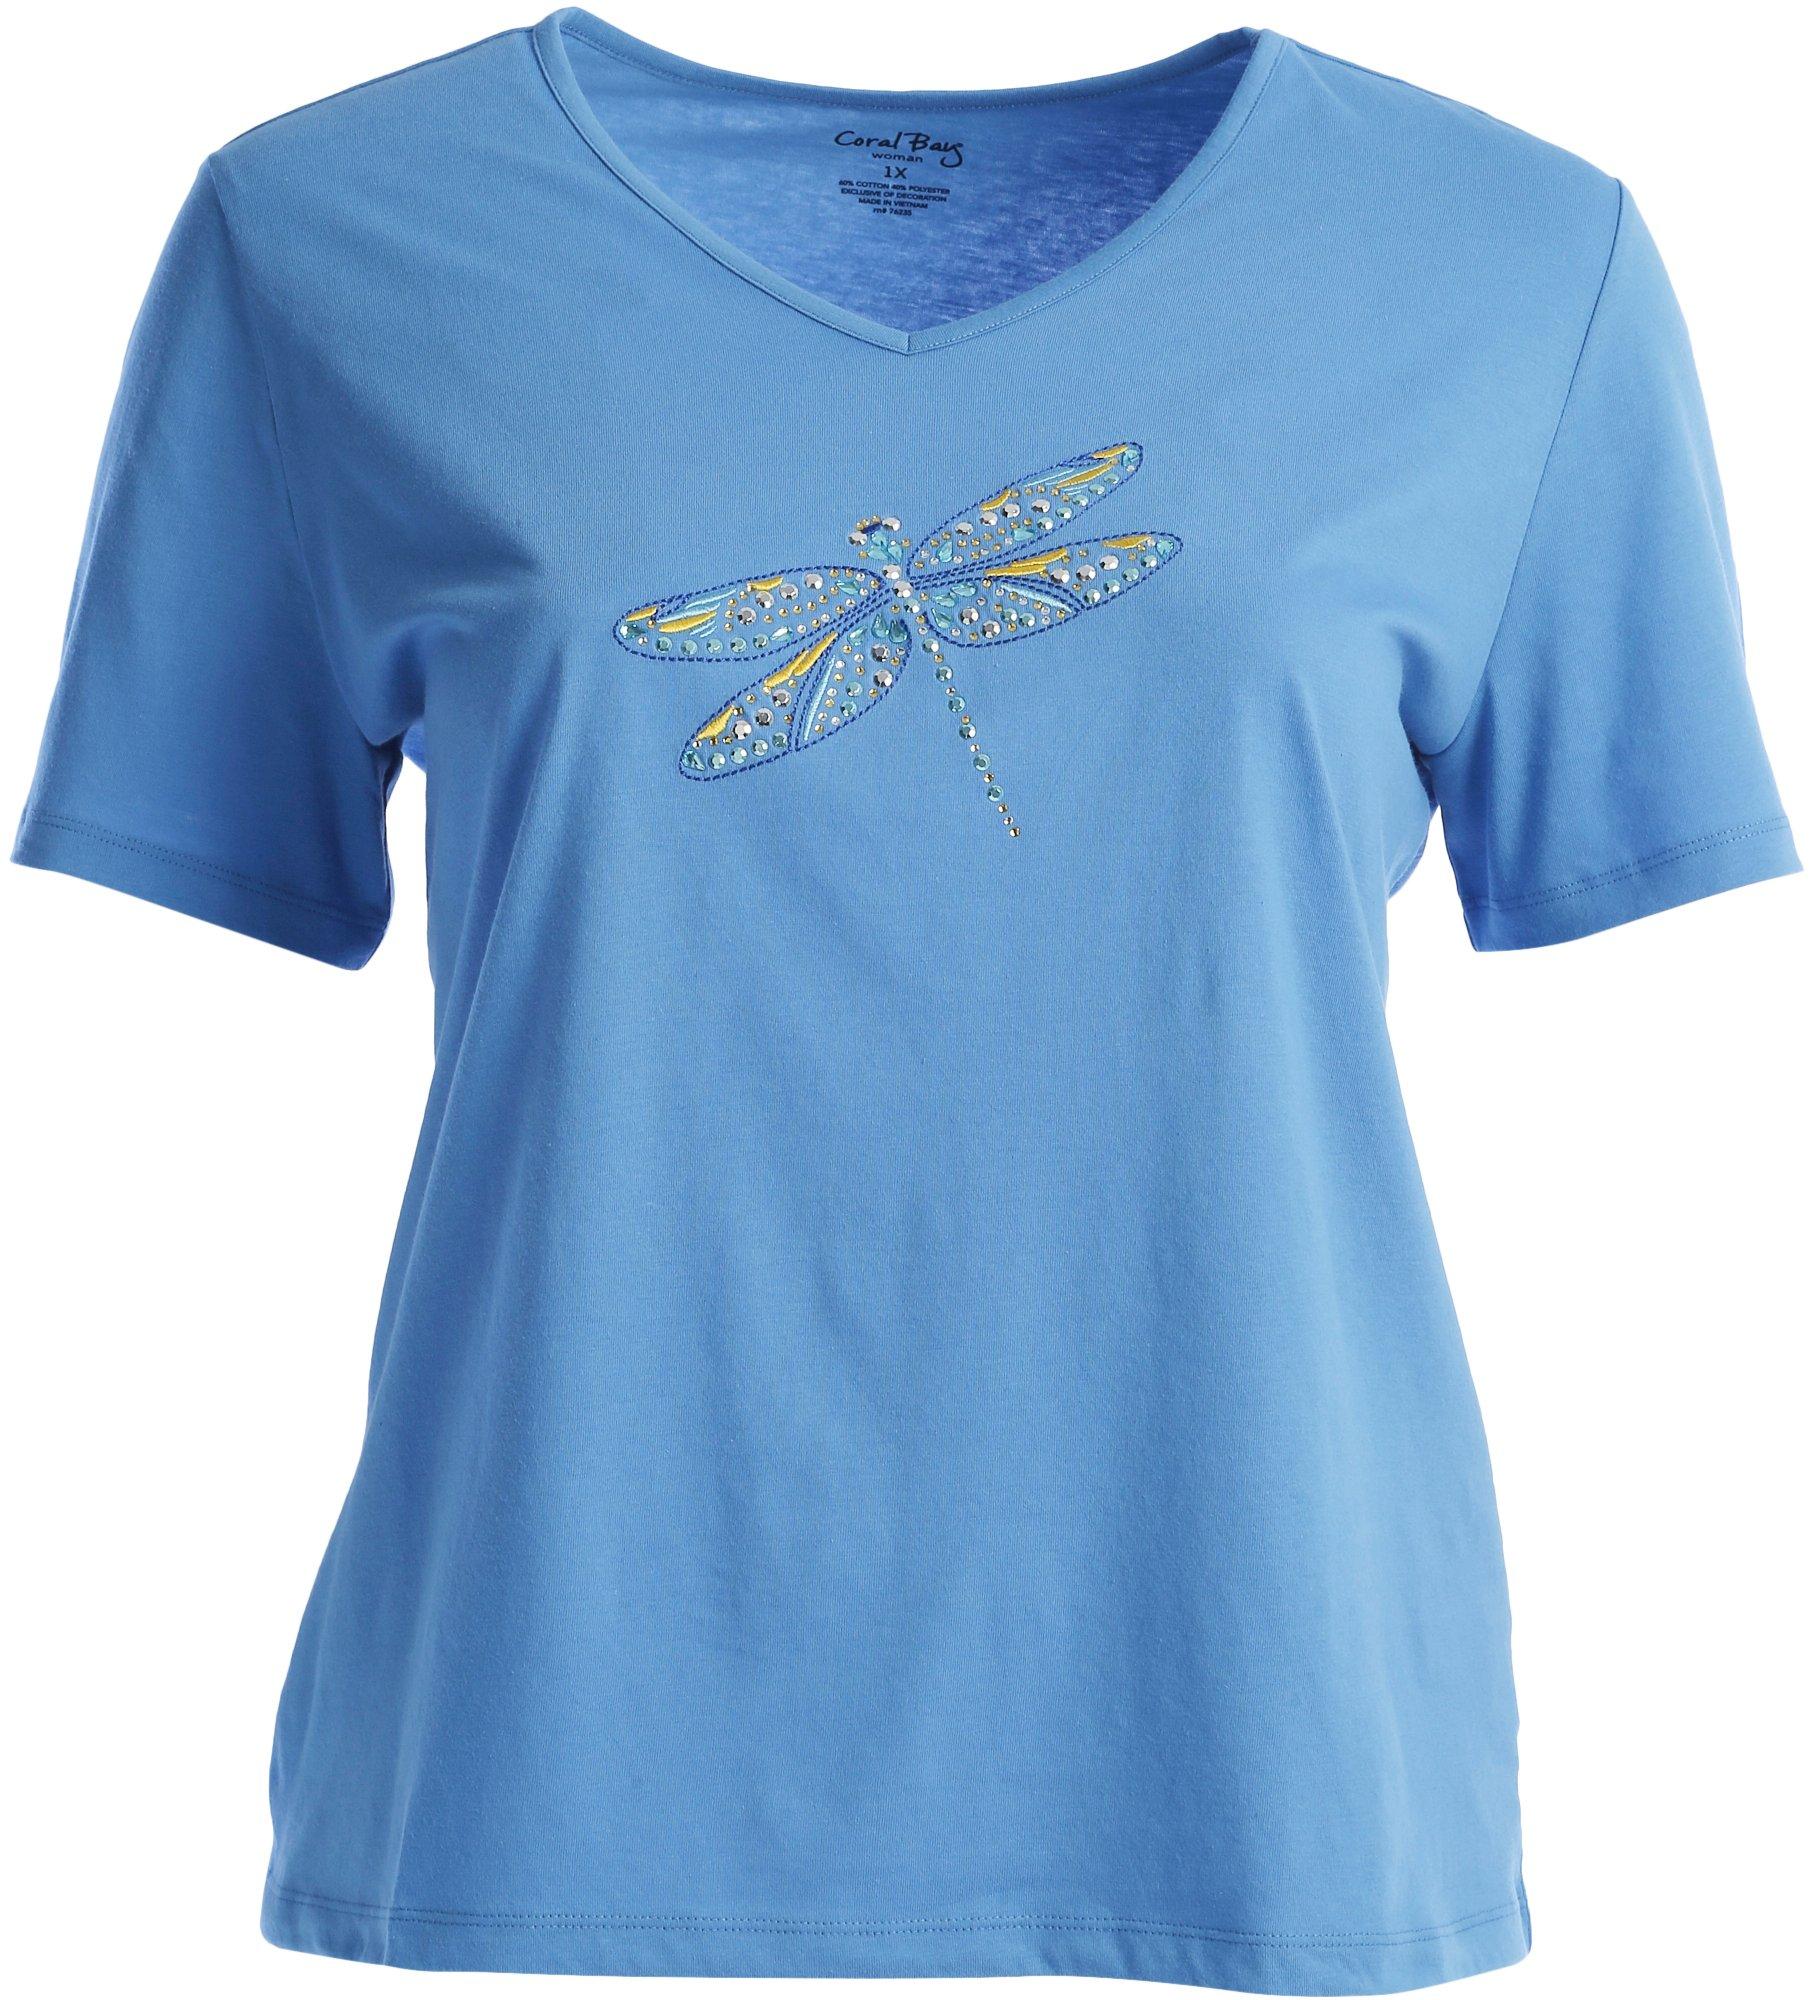 Coral Bay Plus Embroidered Dragonfly Short Sleeve Top